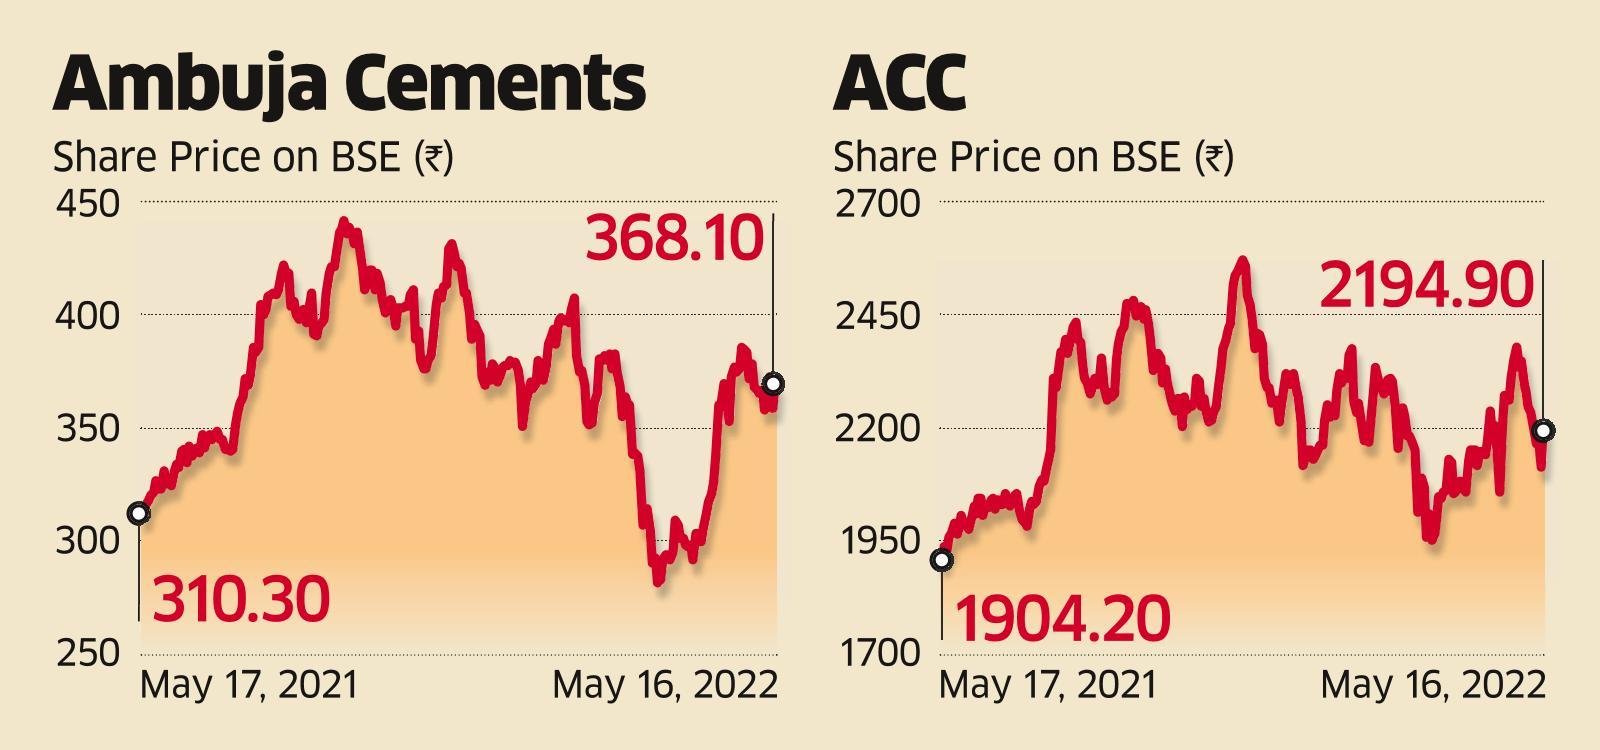 ACC Shares: Immediate re-rating unlikely for ACC, Ambuja Cements - The Economic Times